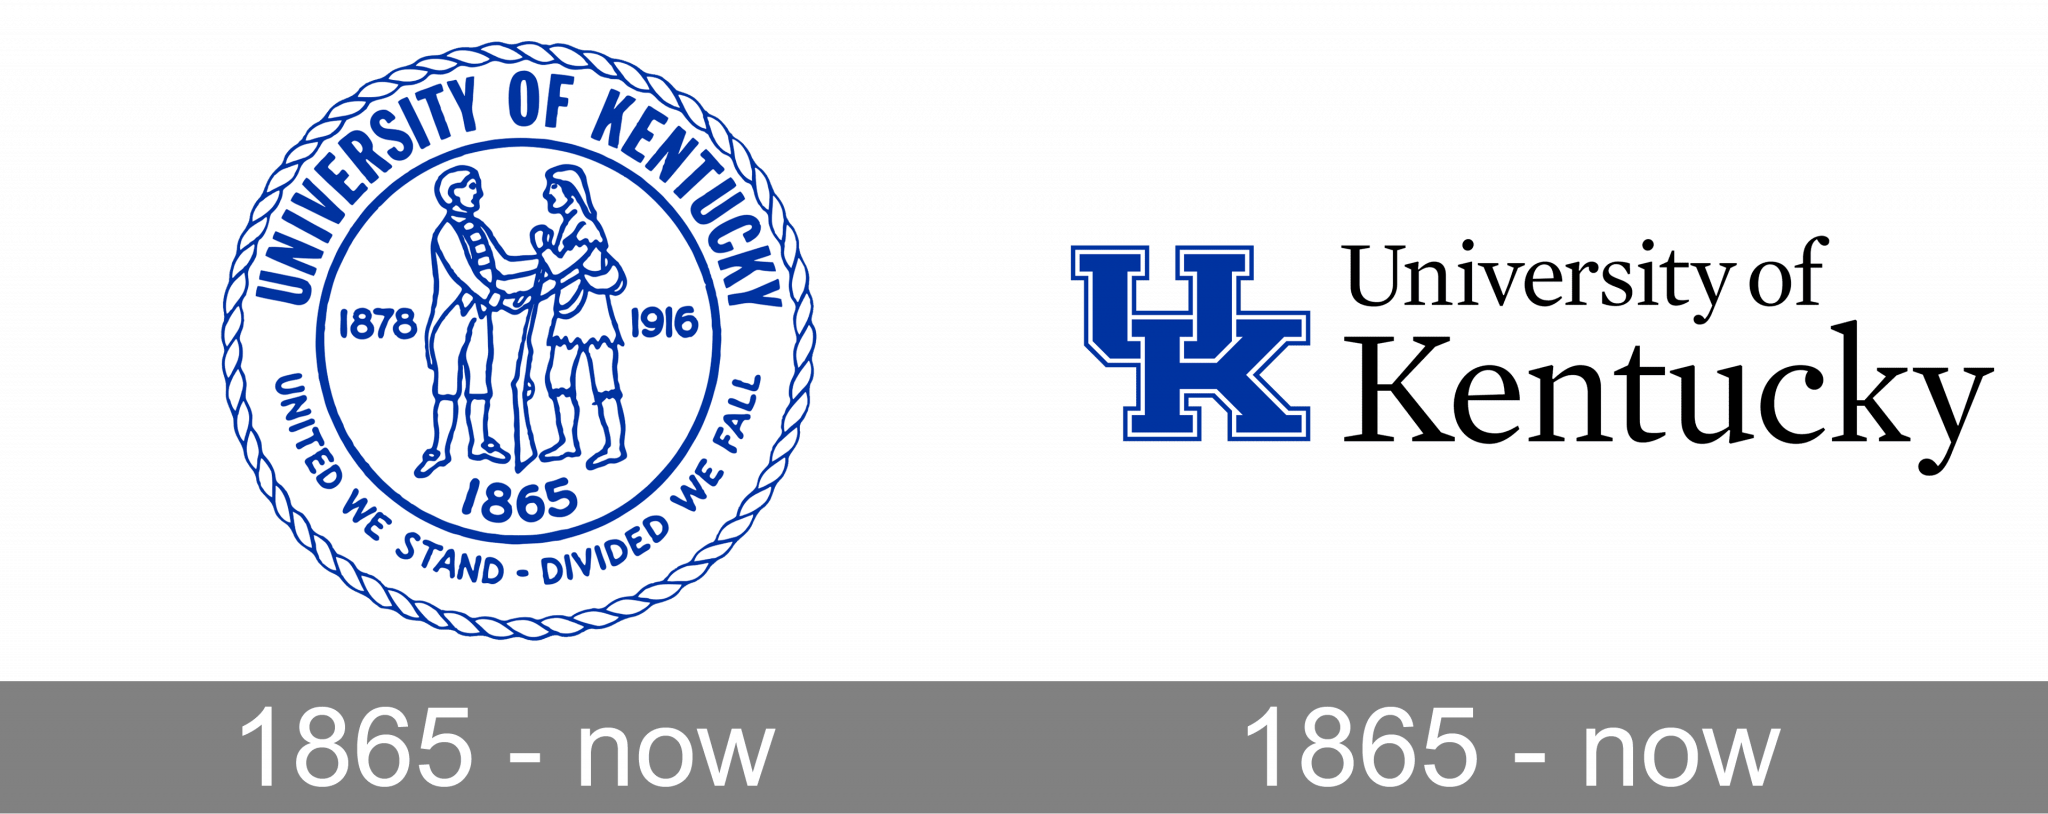 University of Kentucky Logo and symbol, meaning, history, PNG, brand